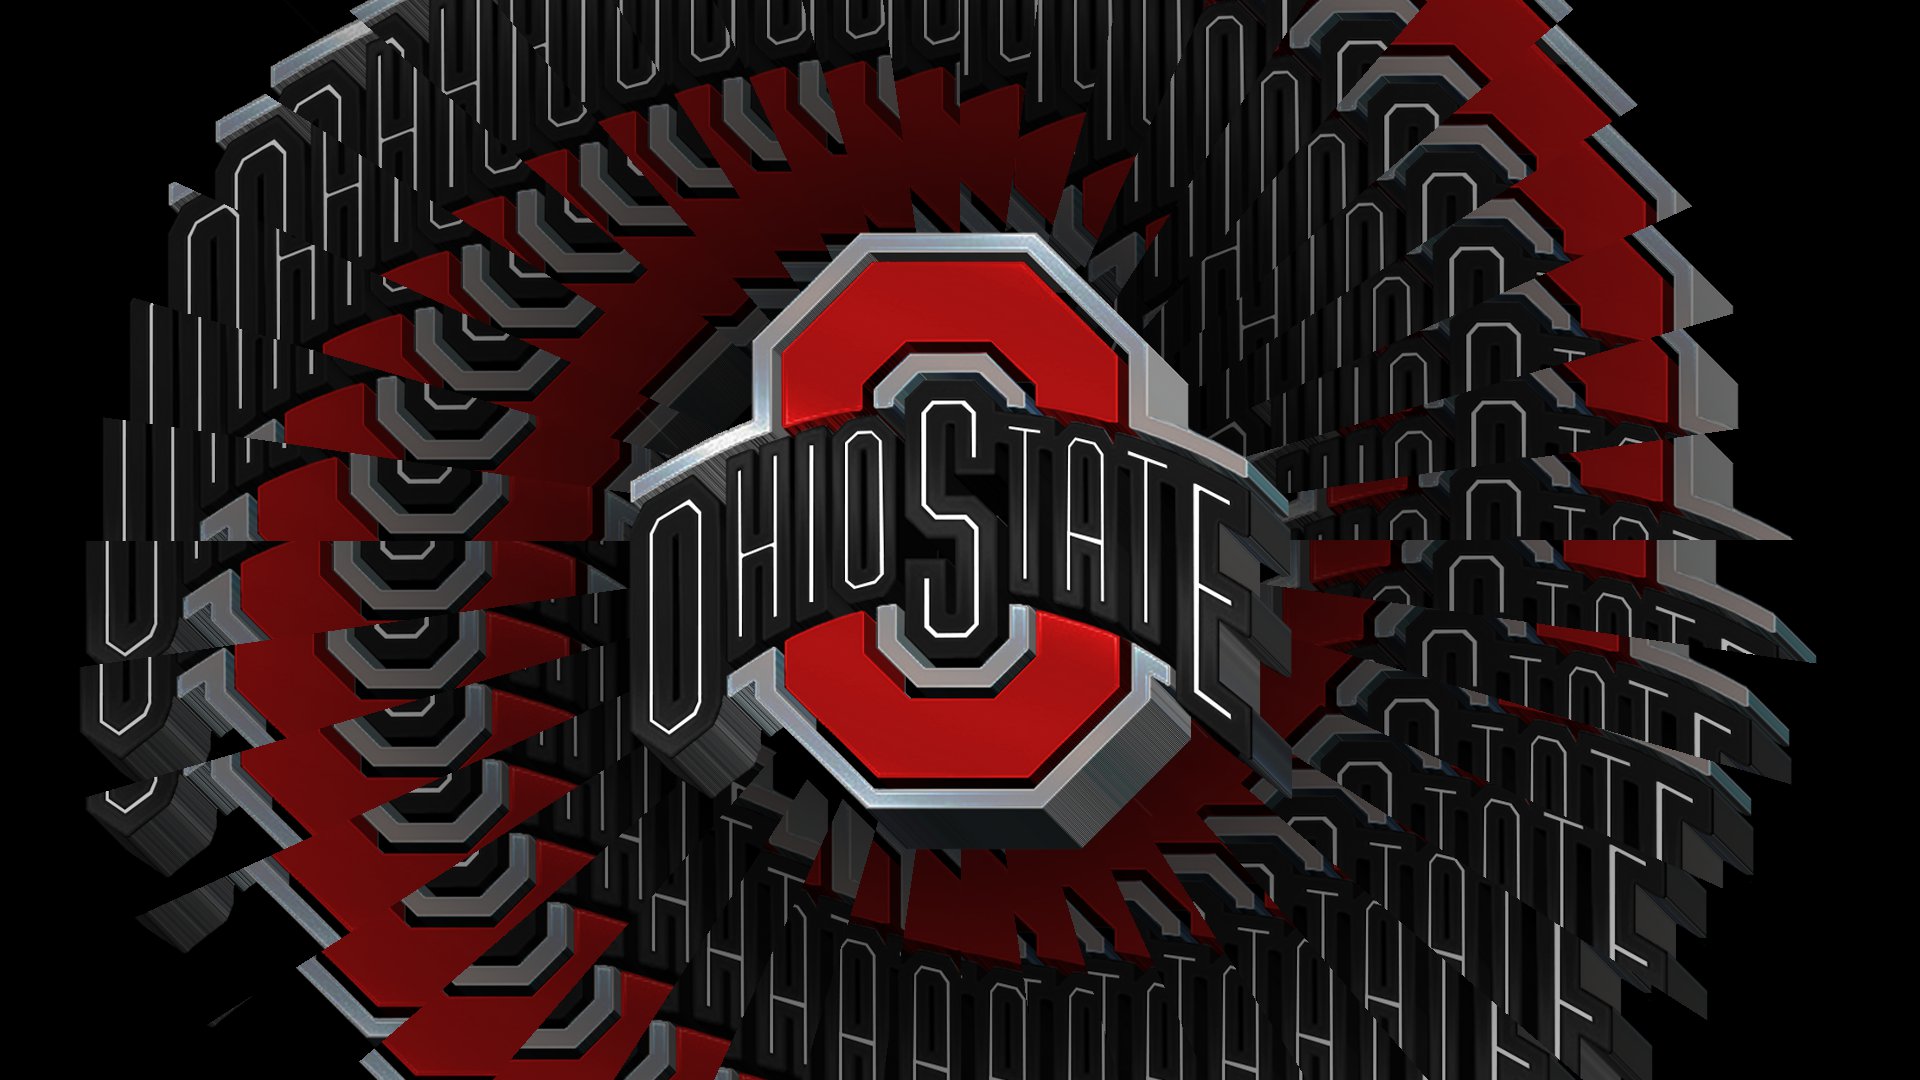 Ohio State Football images OSU Wallpaper 411 HD wallpaper and